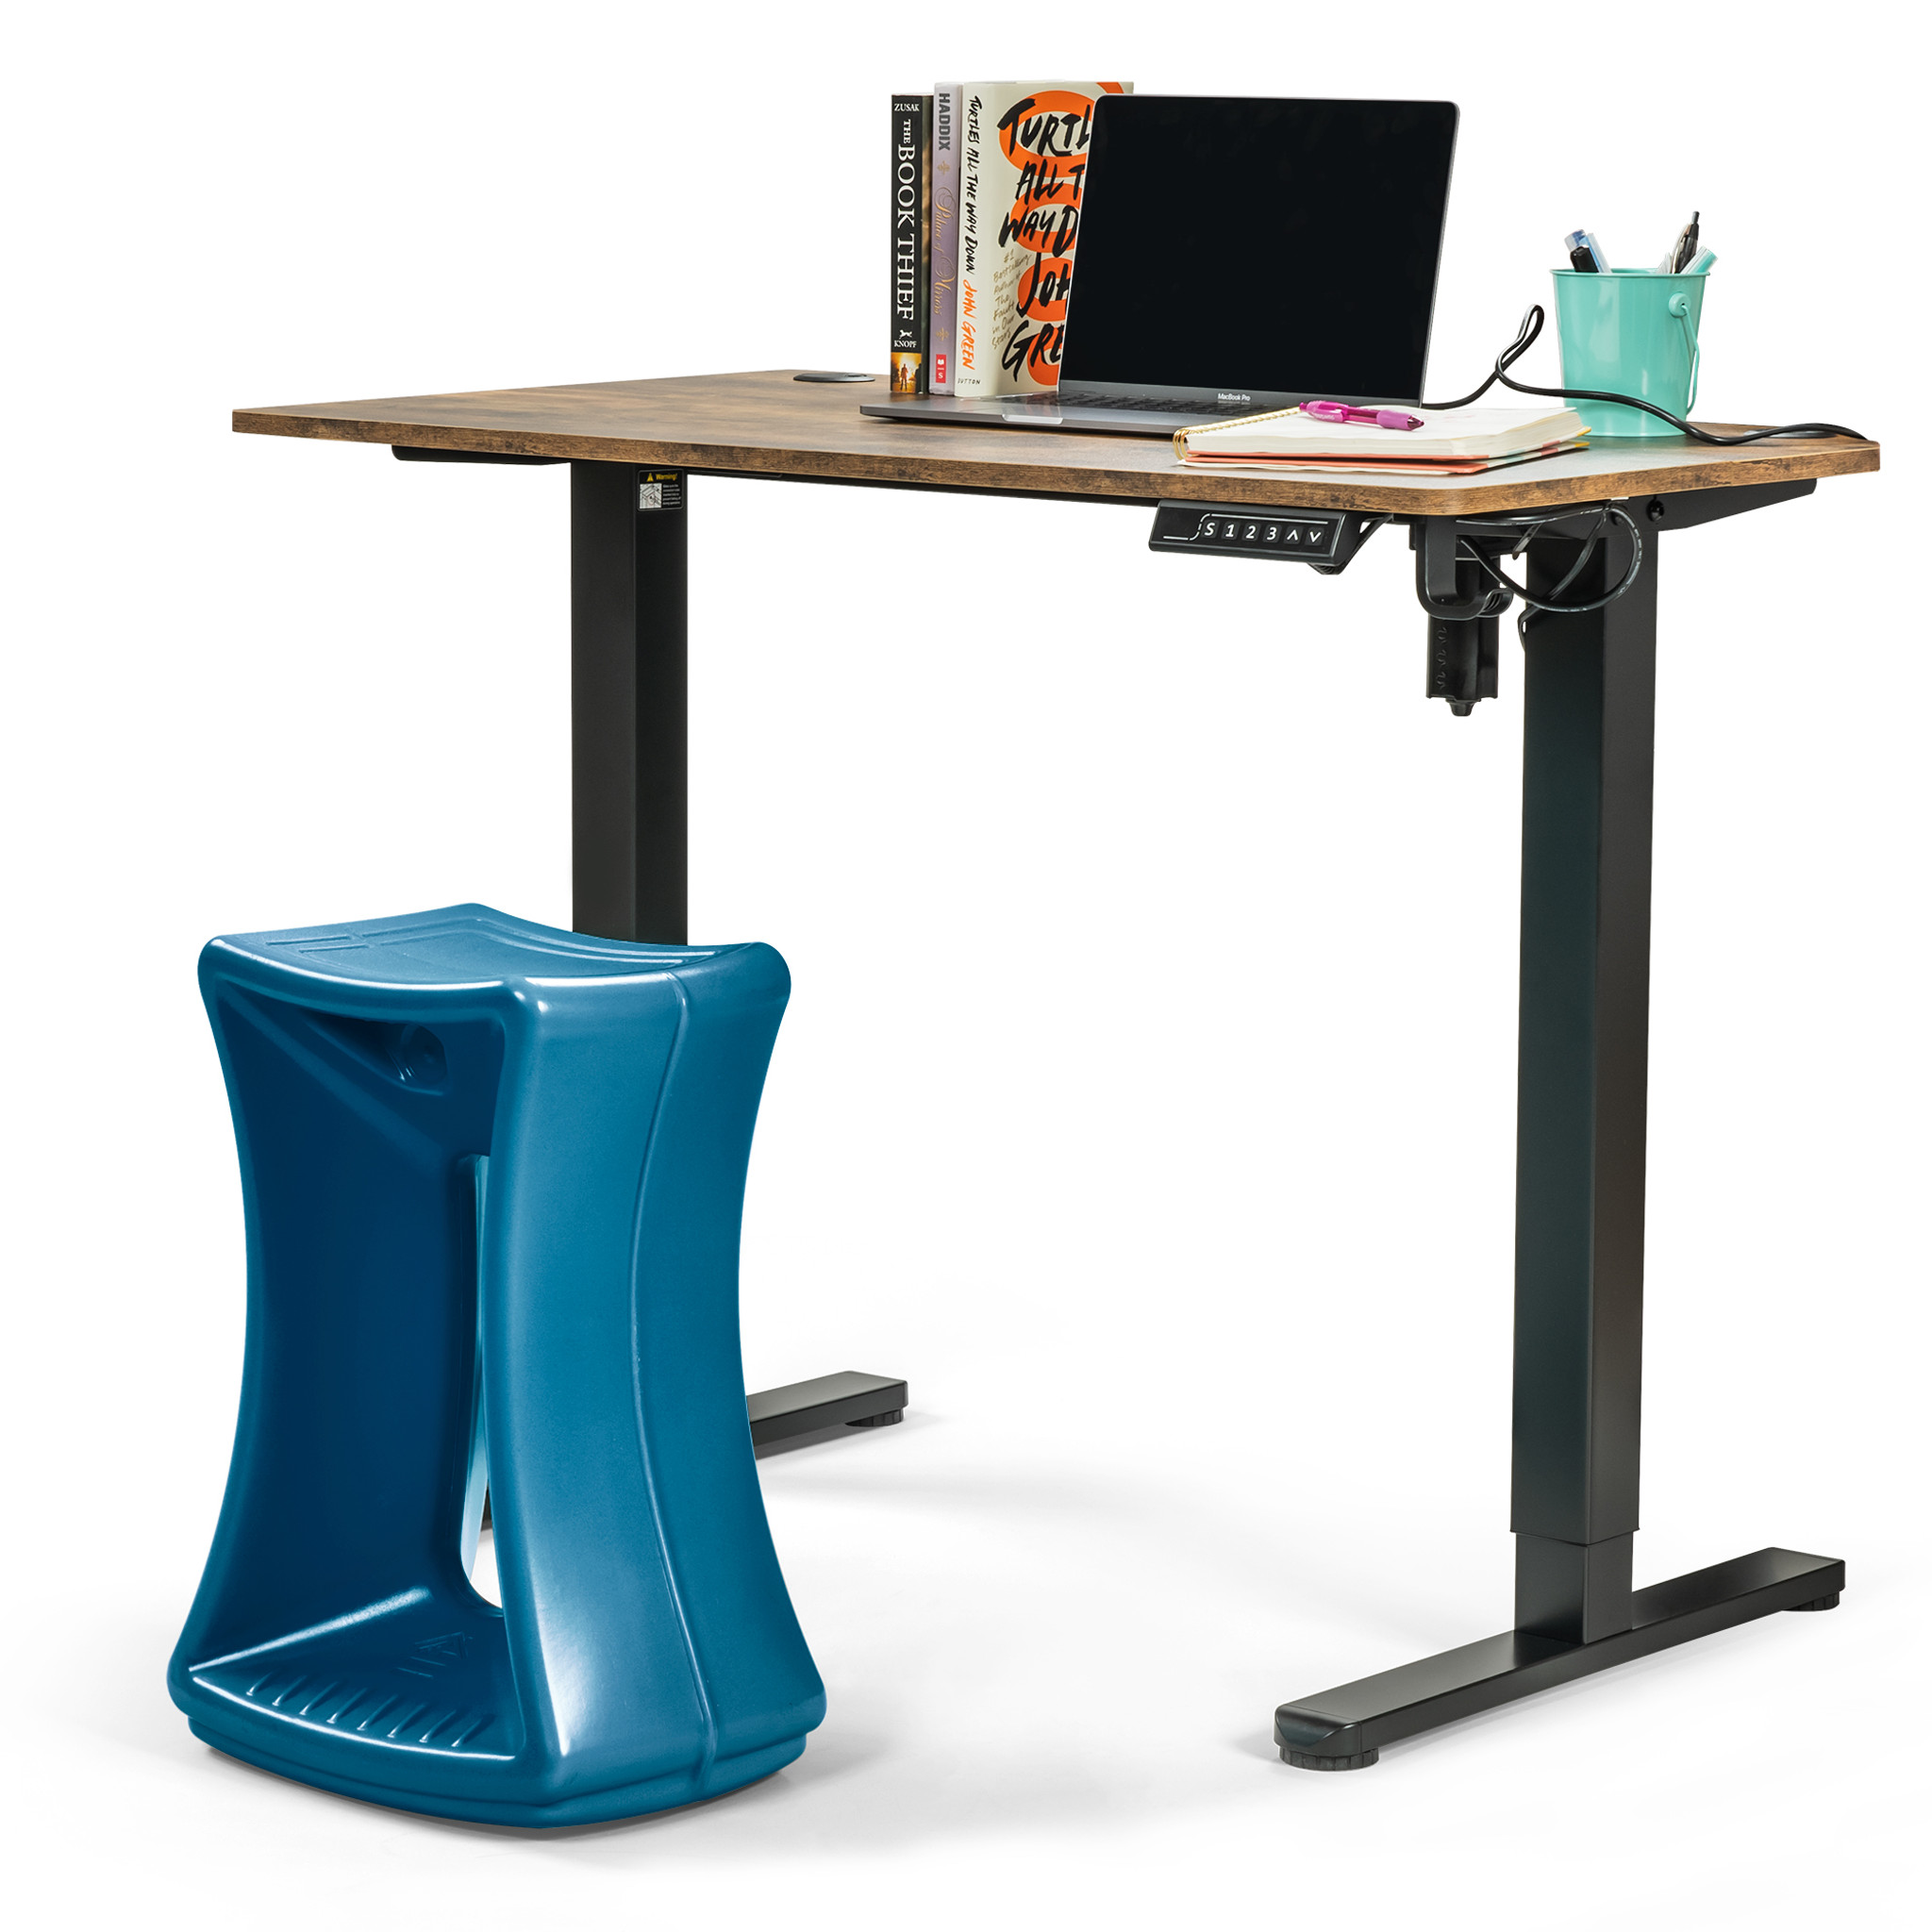 Using Balance Ball Chairs at Your Desk - Thrifty Jinxy